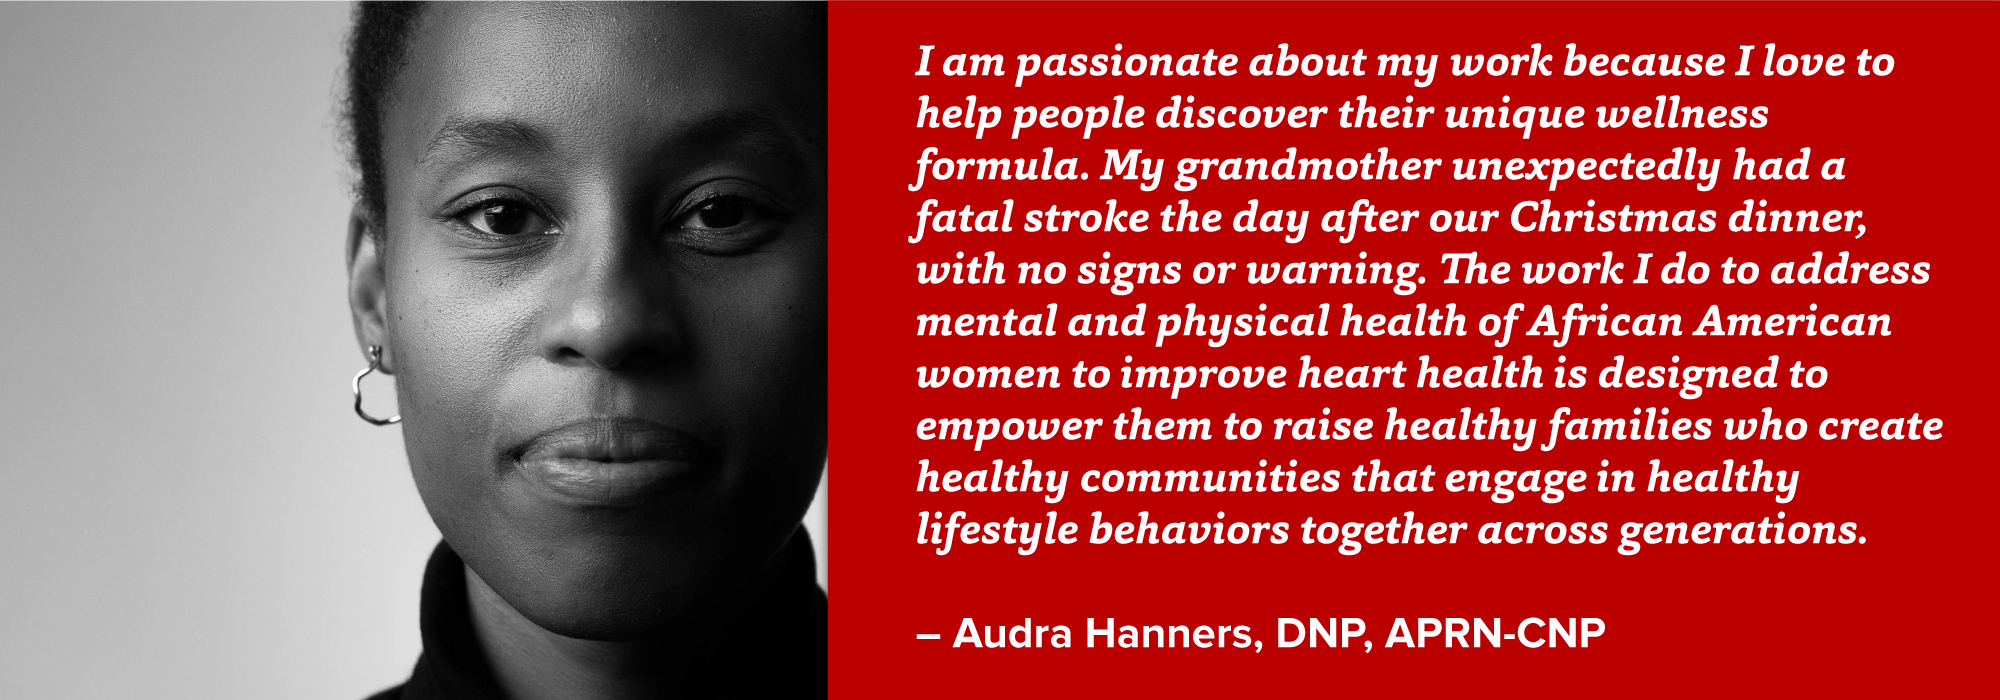 portrait of Audra Hanners with quote: I am passionate about my work because I love to help people discover their unique wellness formula. My grandmother unexpectedly had a fatal stroke the day after our Christmas dinner, with no signs or warning. The work I do to address mental and physical health of African American women to improve heart health is designed to empower them to raise healthy families who create healthy communities that engage in healthy lifestyle behaviors together across generations.  – Audra Hanners, DNP, APRN-CNP